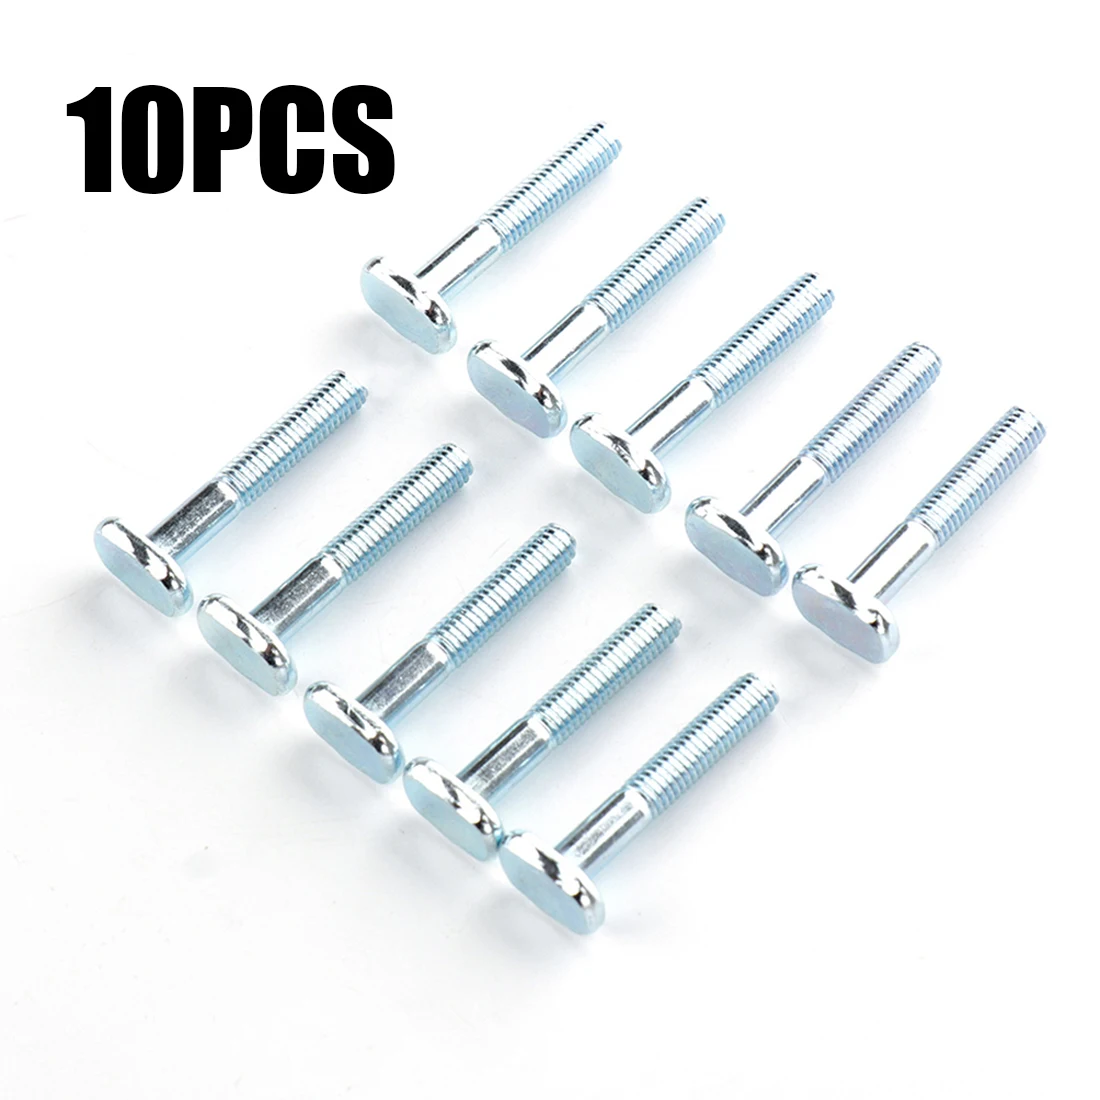 10pcs M6x40mm T-Nut Sliding Screws T-track T-slot Miter Track Jig Table Saw Router Carpentry Jigs Woodworking Tool router jigs